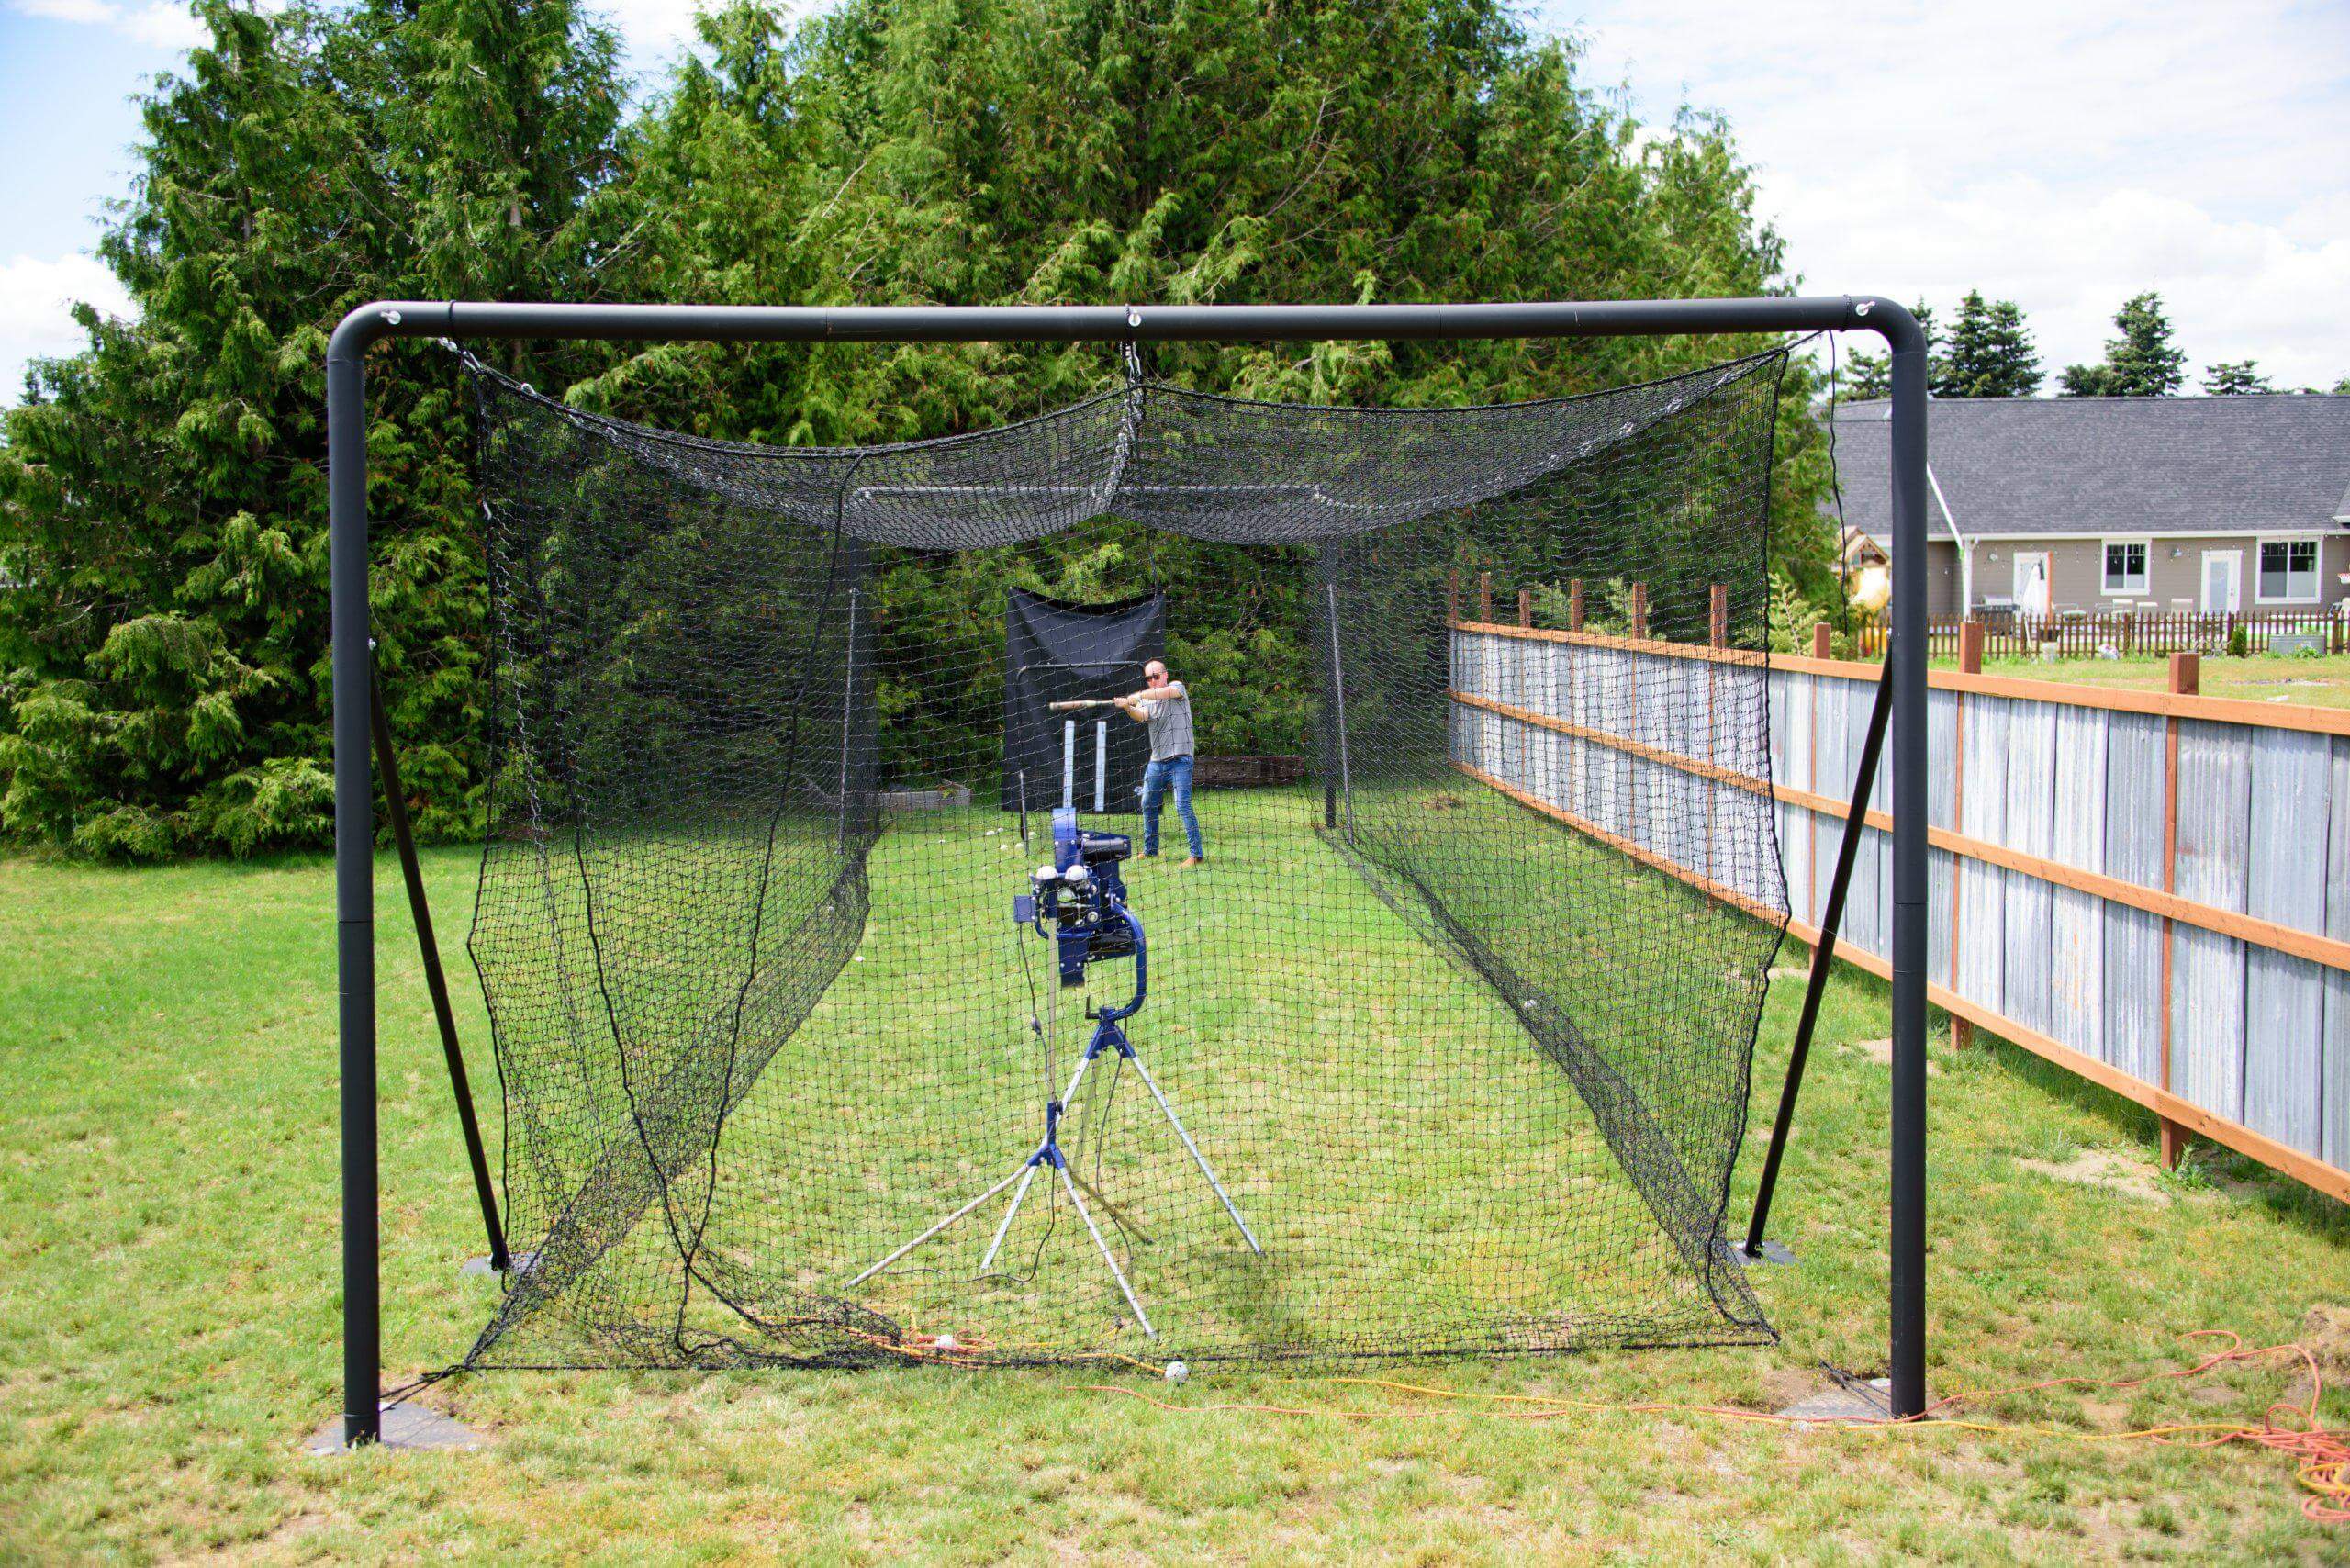 Front view of the Iron Horse batting cage with man batting 